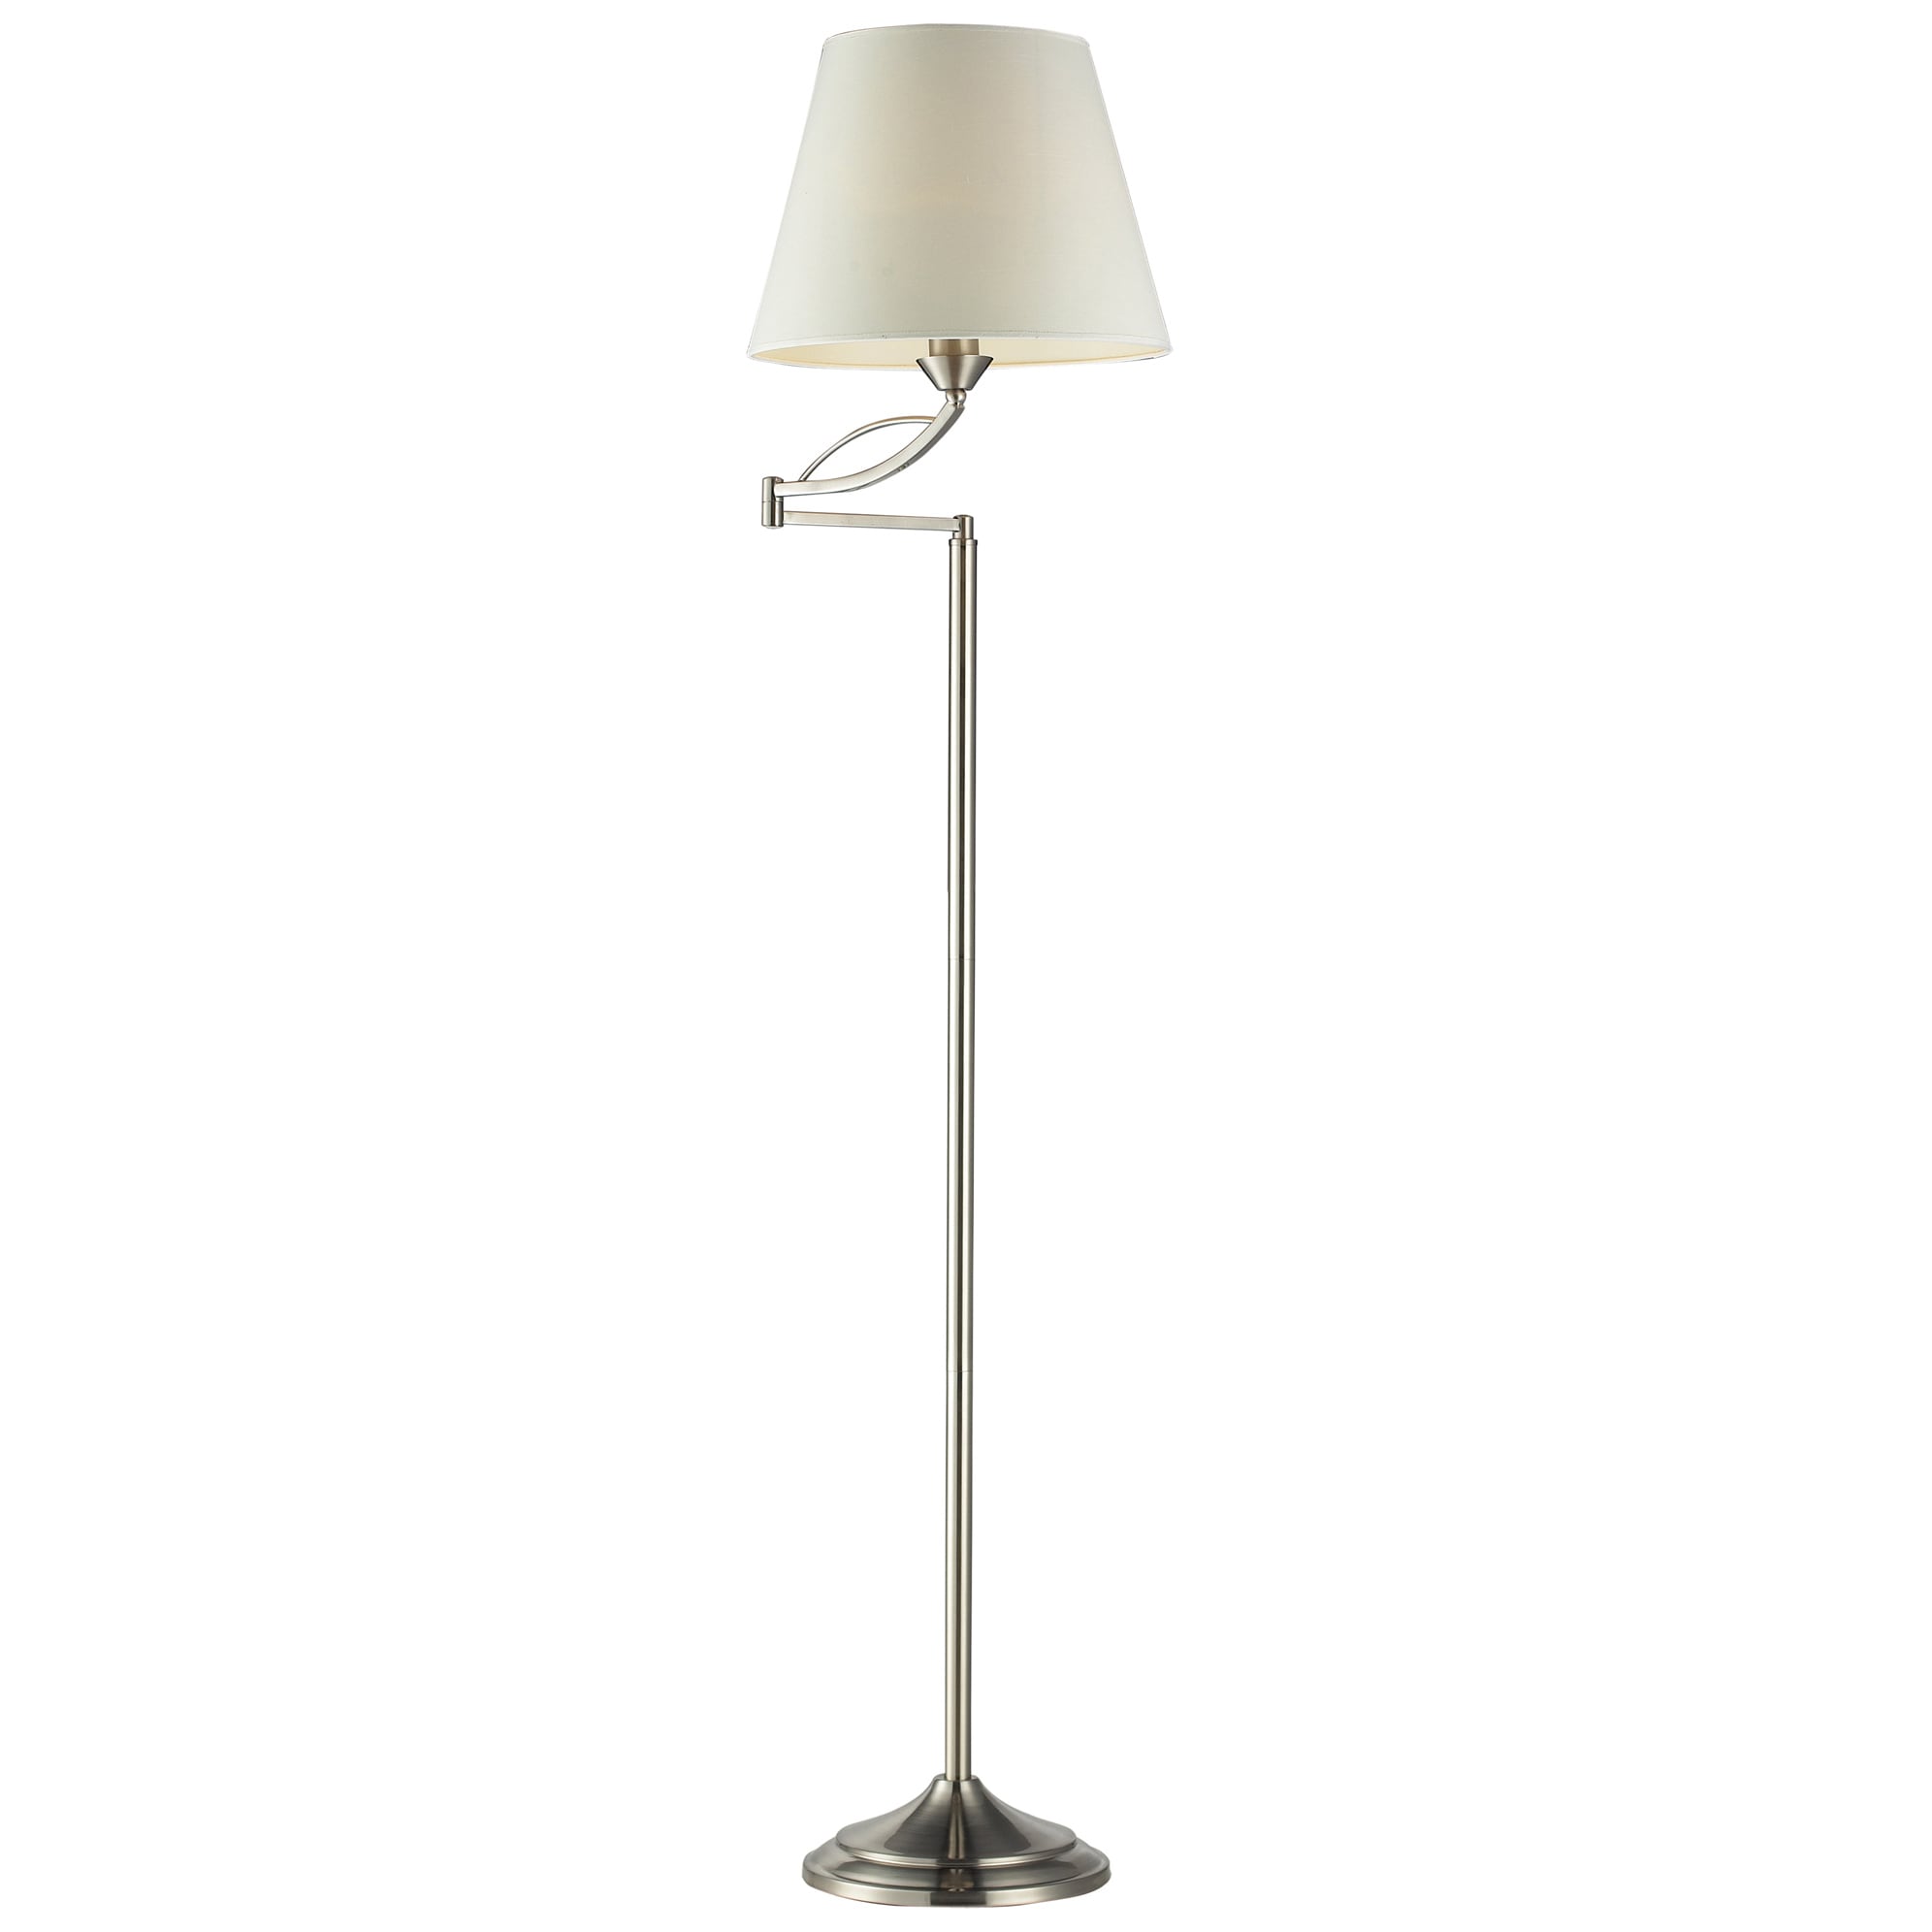 Shop Dimond Lighting Led 1 Light Floor Lamp In Satin Nickel Finish Overstock 8035496,Whats The Best Gin On The Market